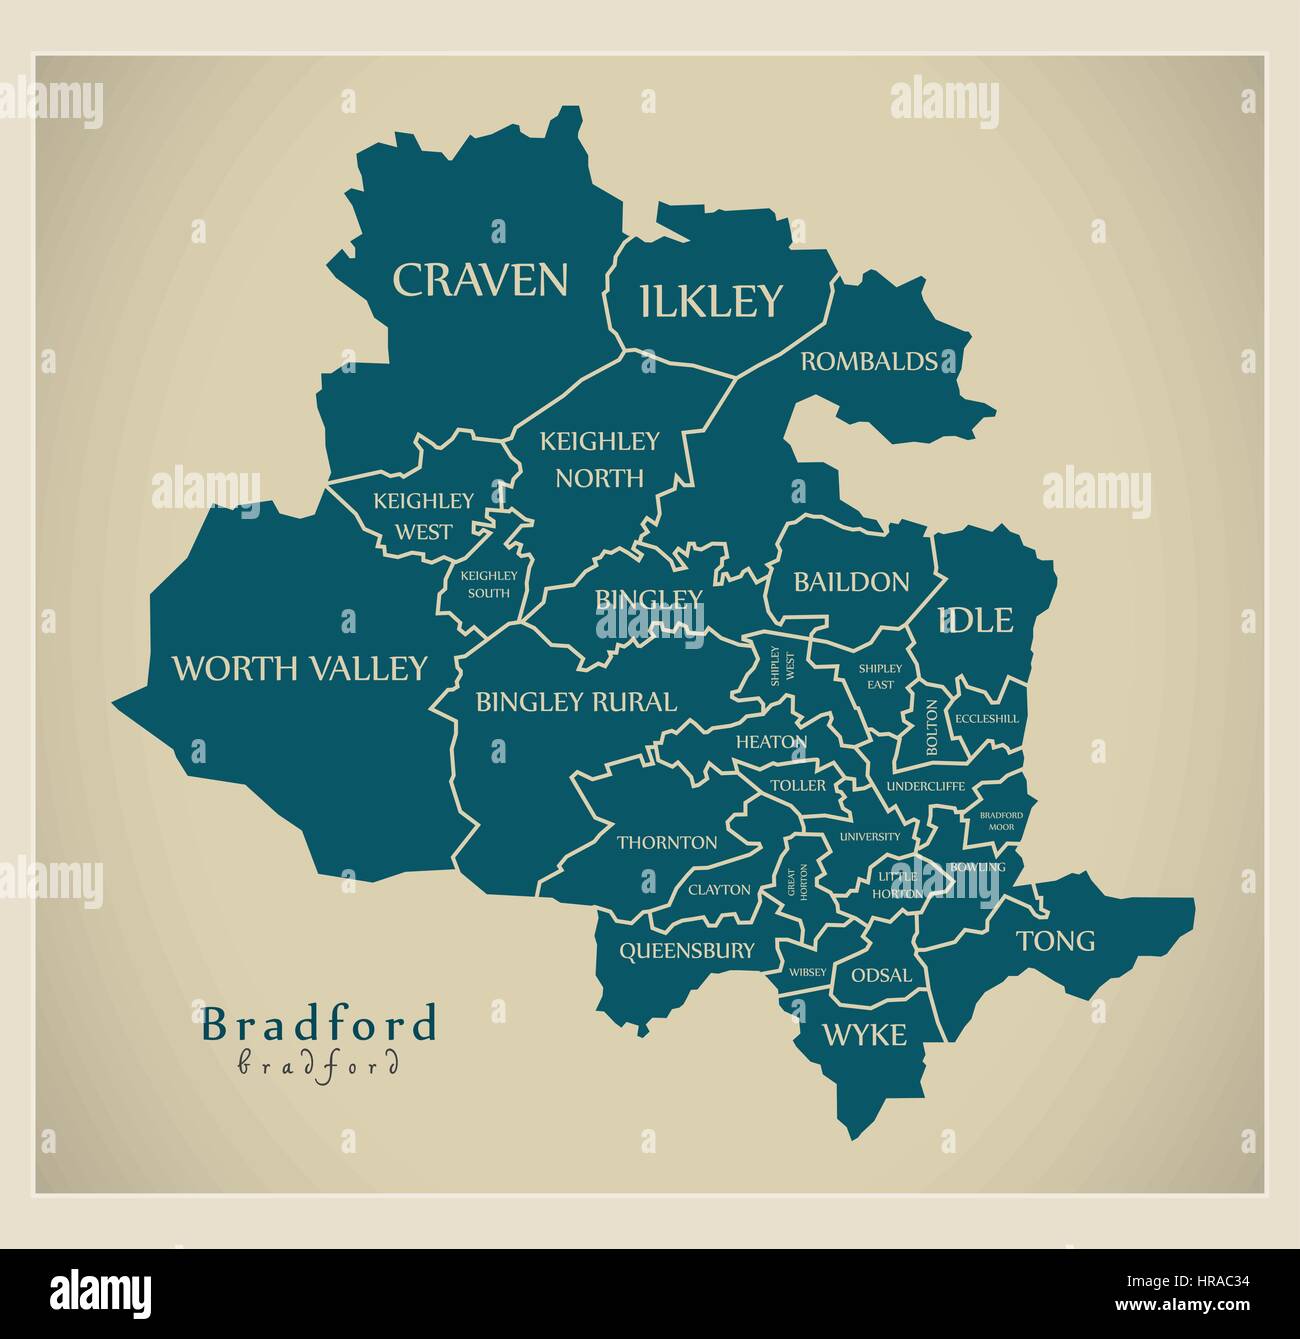 Modern City Map - Bradford with labelled boroughs illustration Stock ...